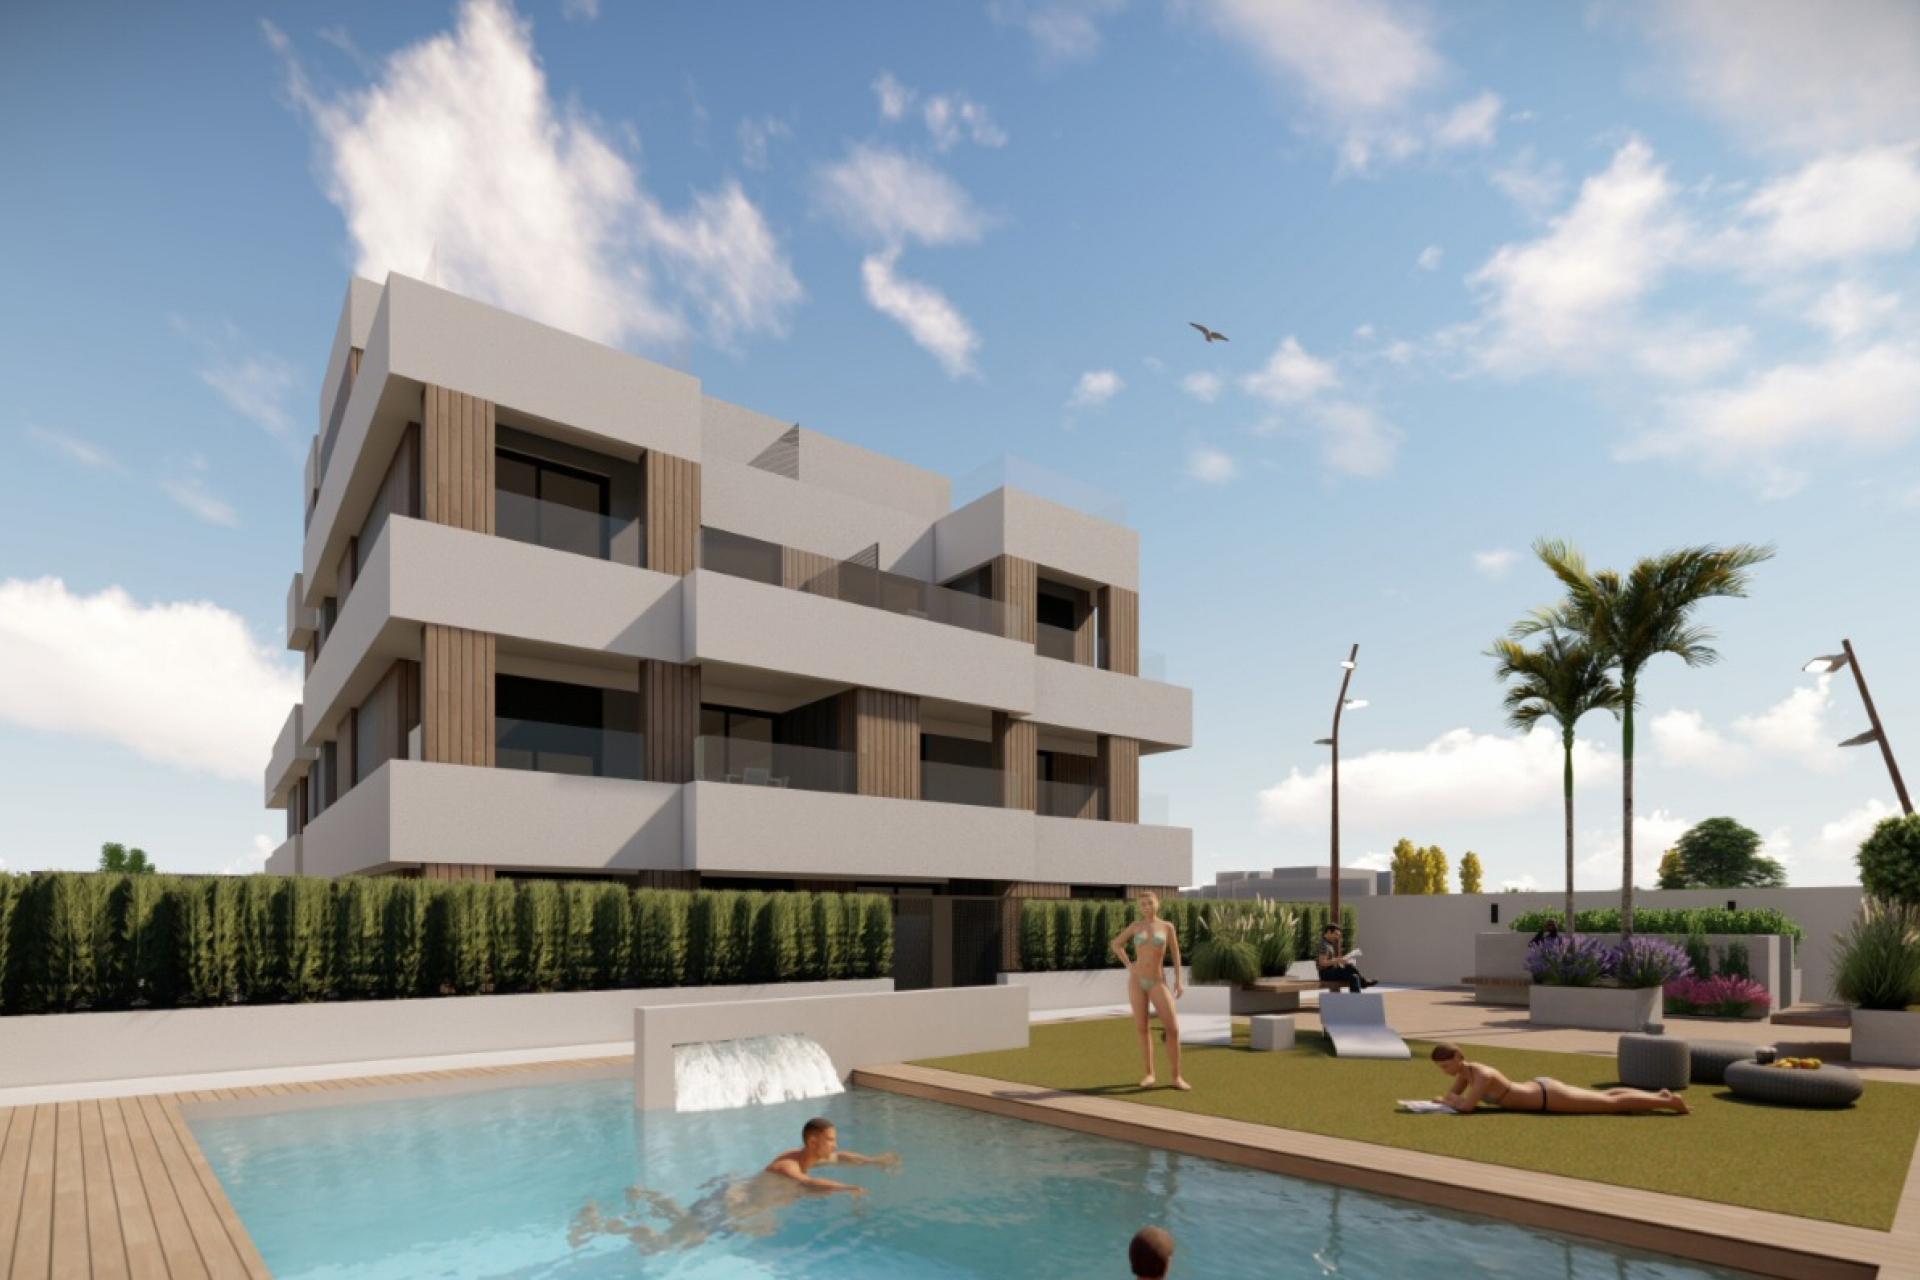 Property Sold - Apartment for sale - San Javier